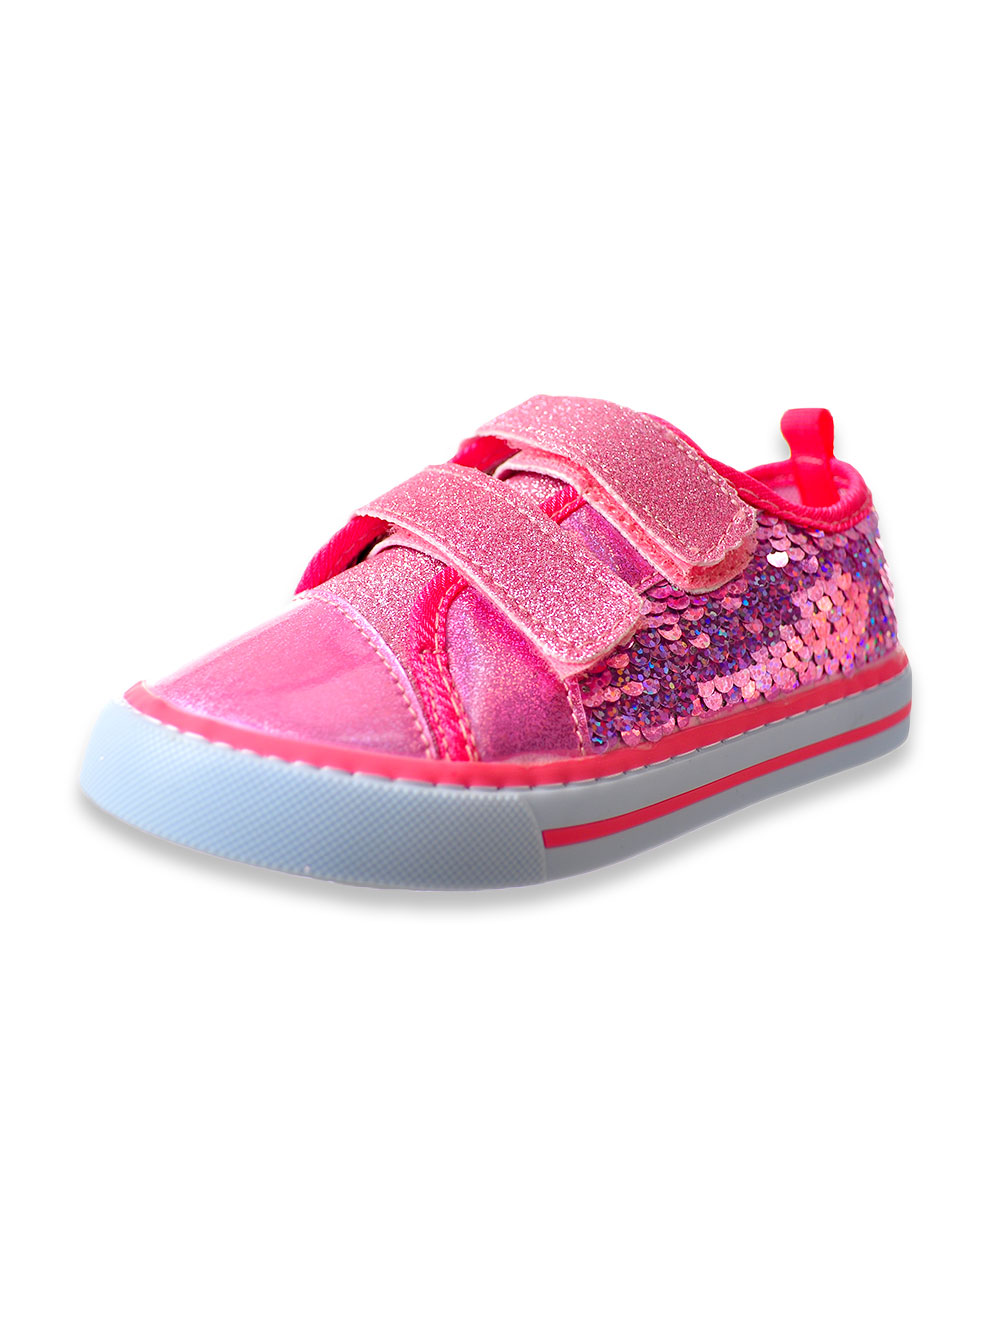 Girls Pink and Multicolor Sneakers